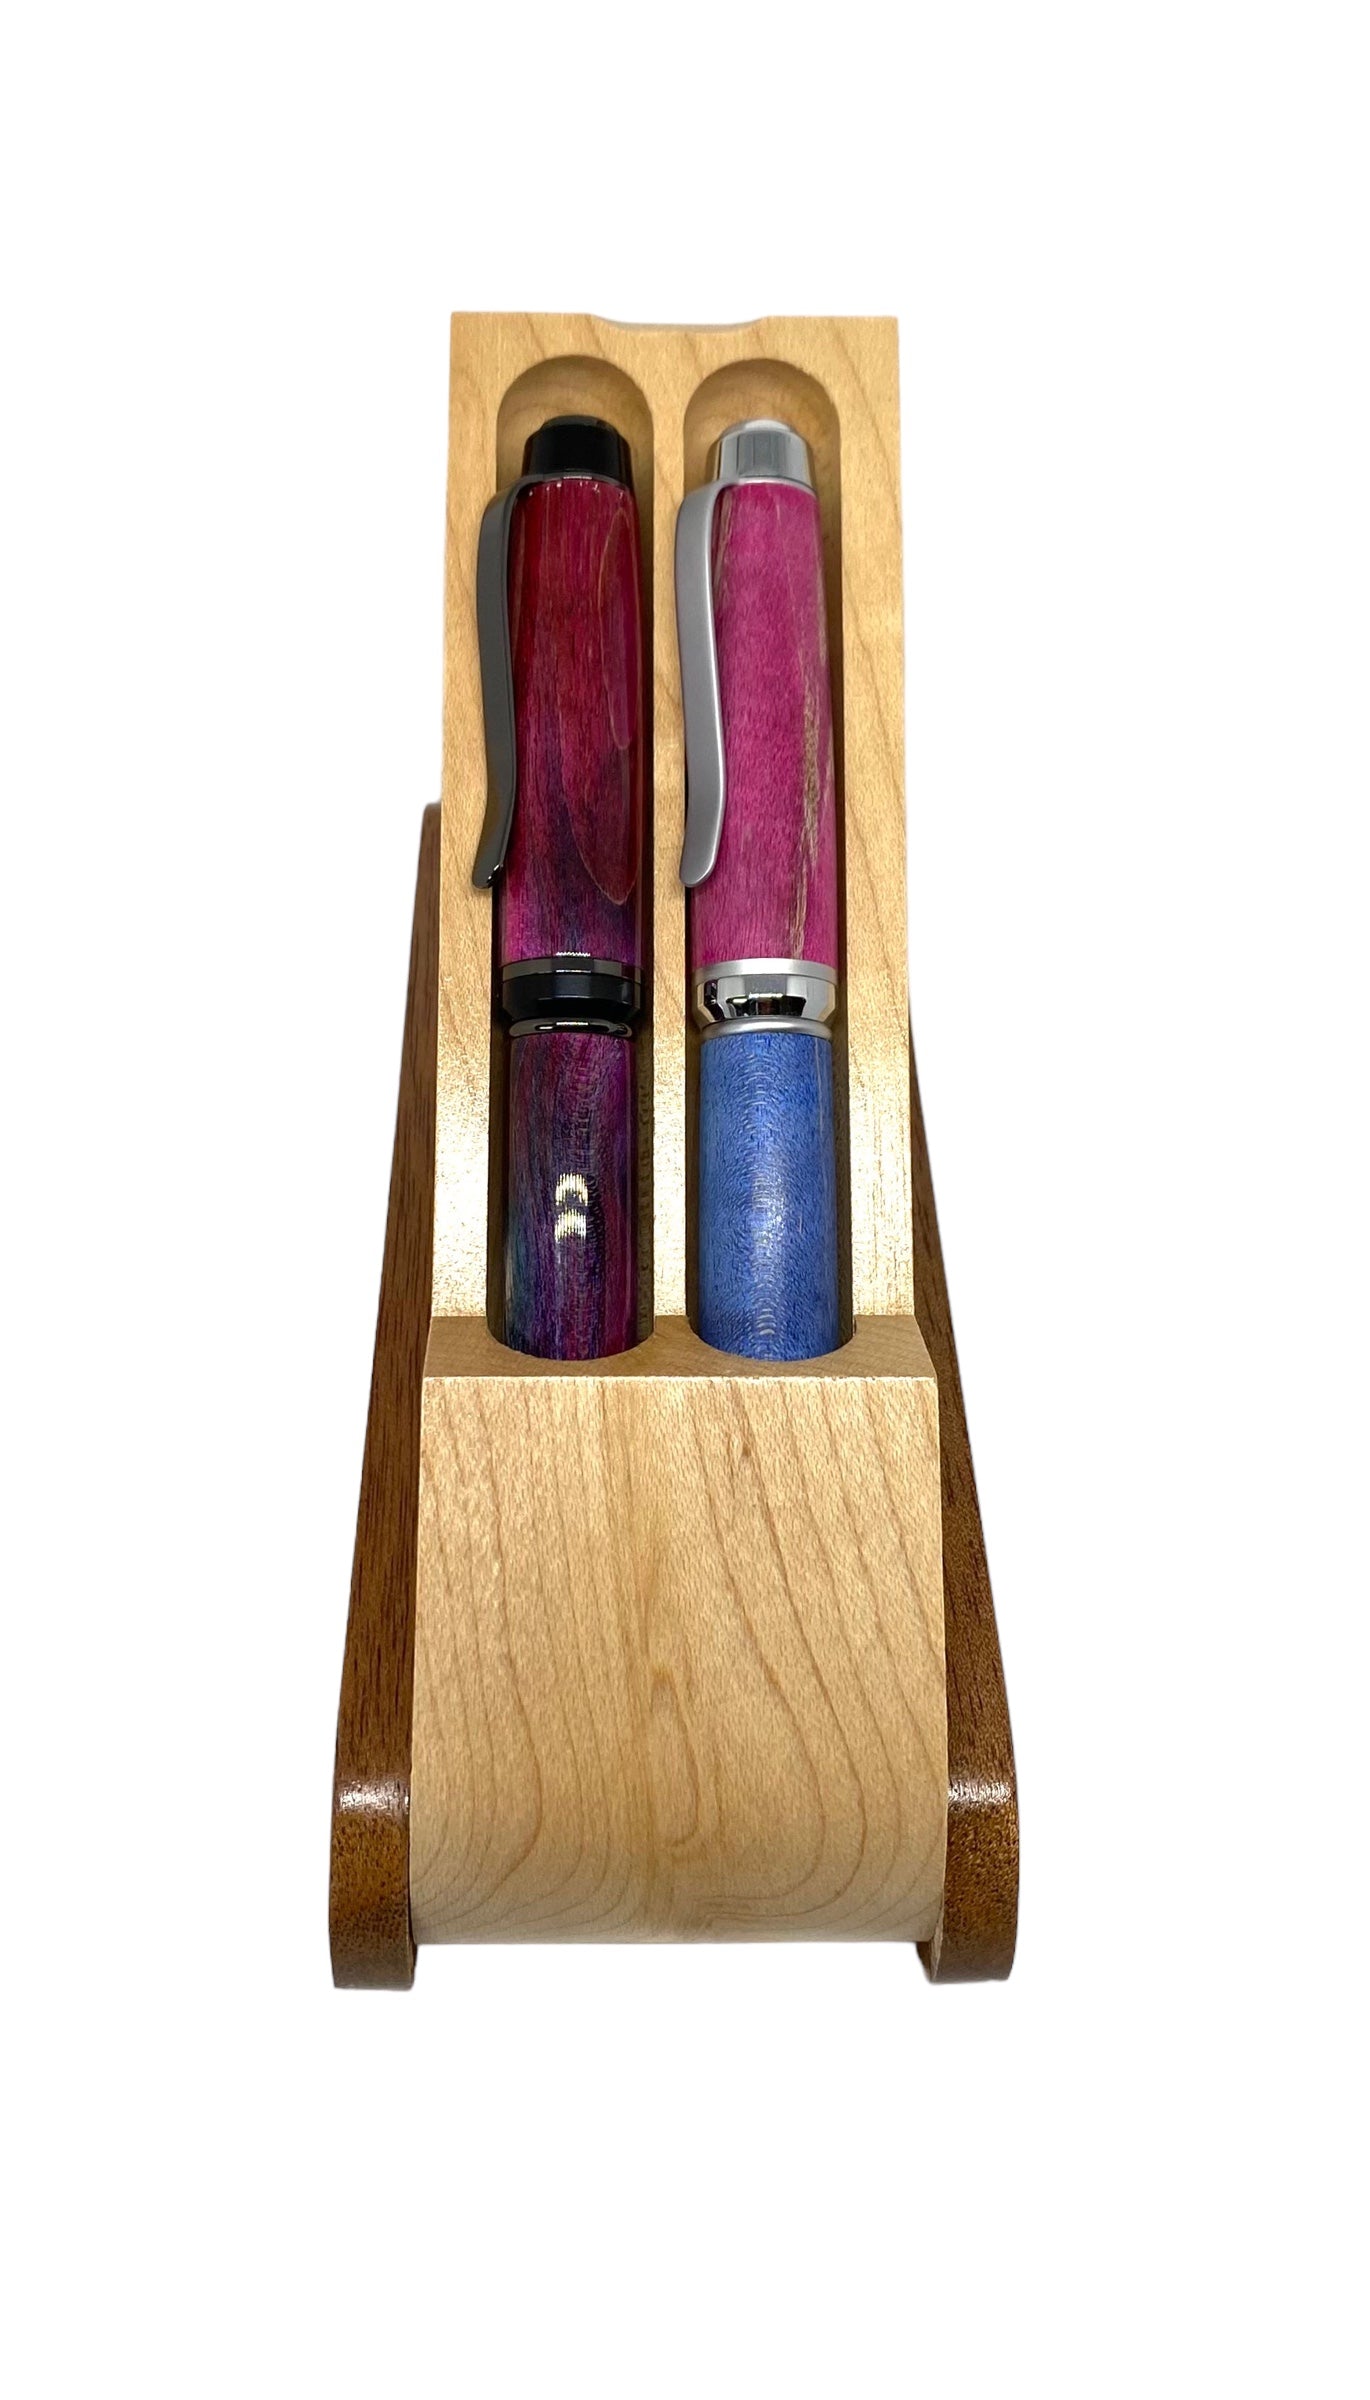 Maple and rosewood double pen case